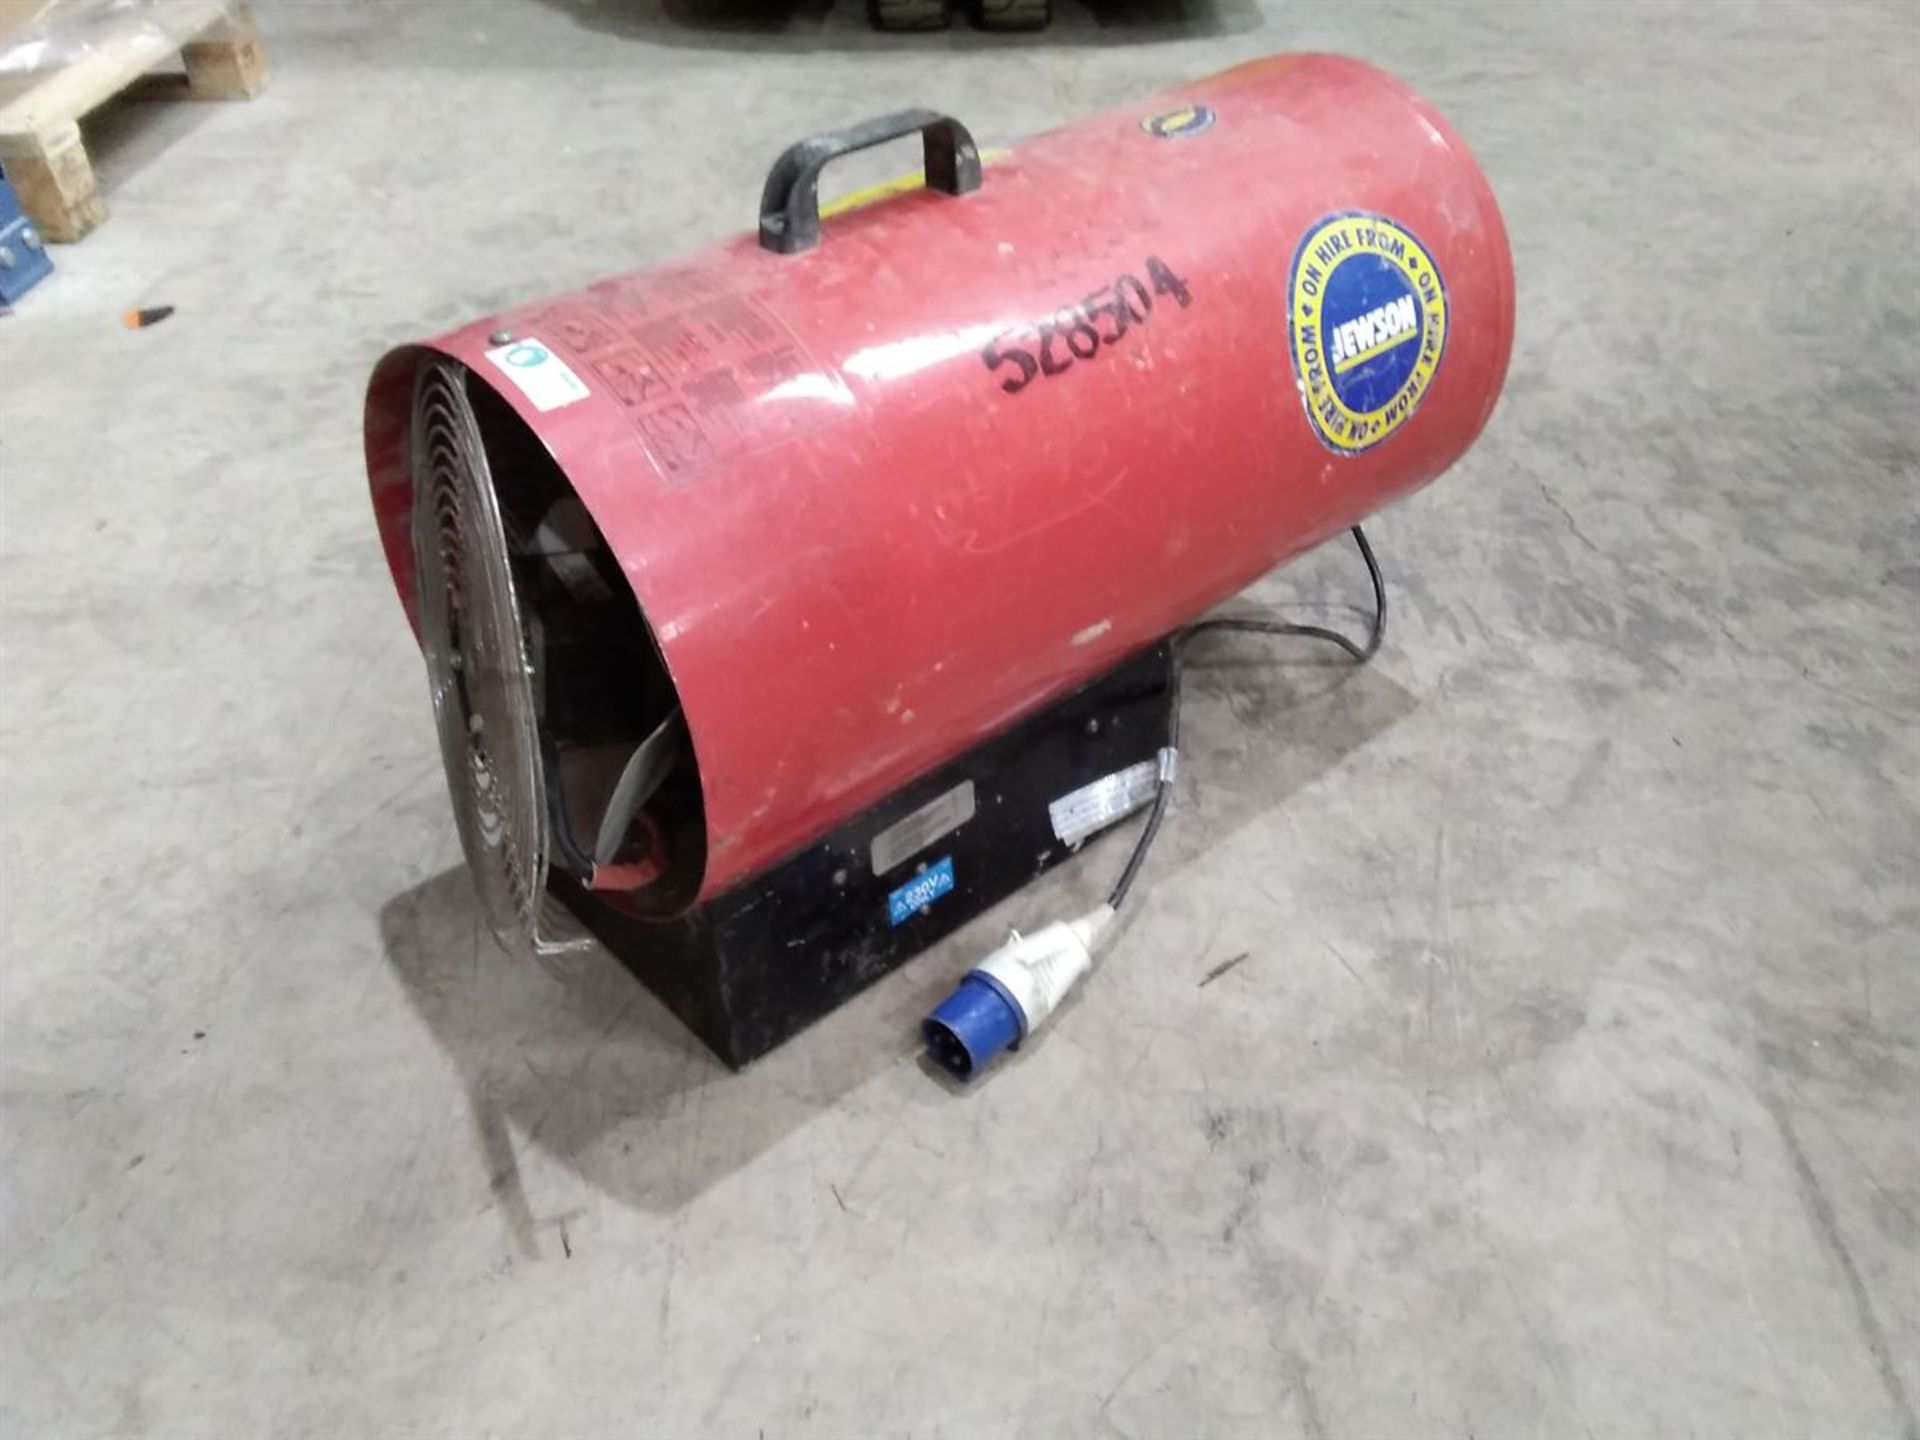 ITM PROPANE GAS SPACE HEATER